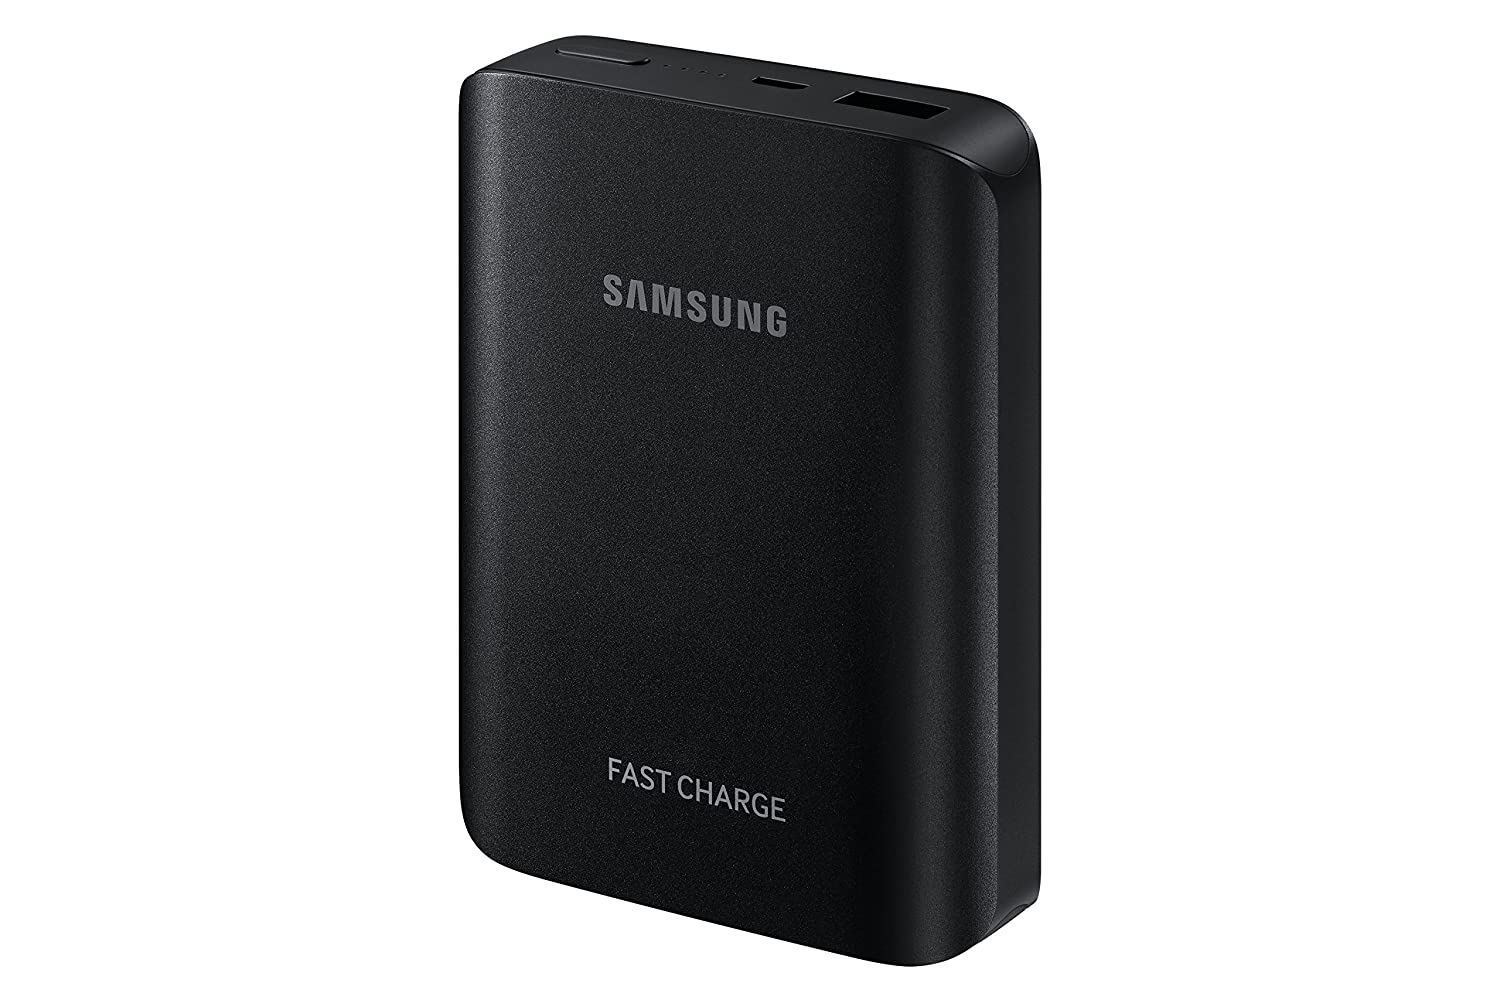 ''Samsung Fast Charge 10200mAh External BATTERY Pack, Black''